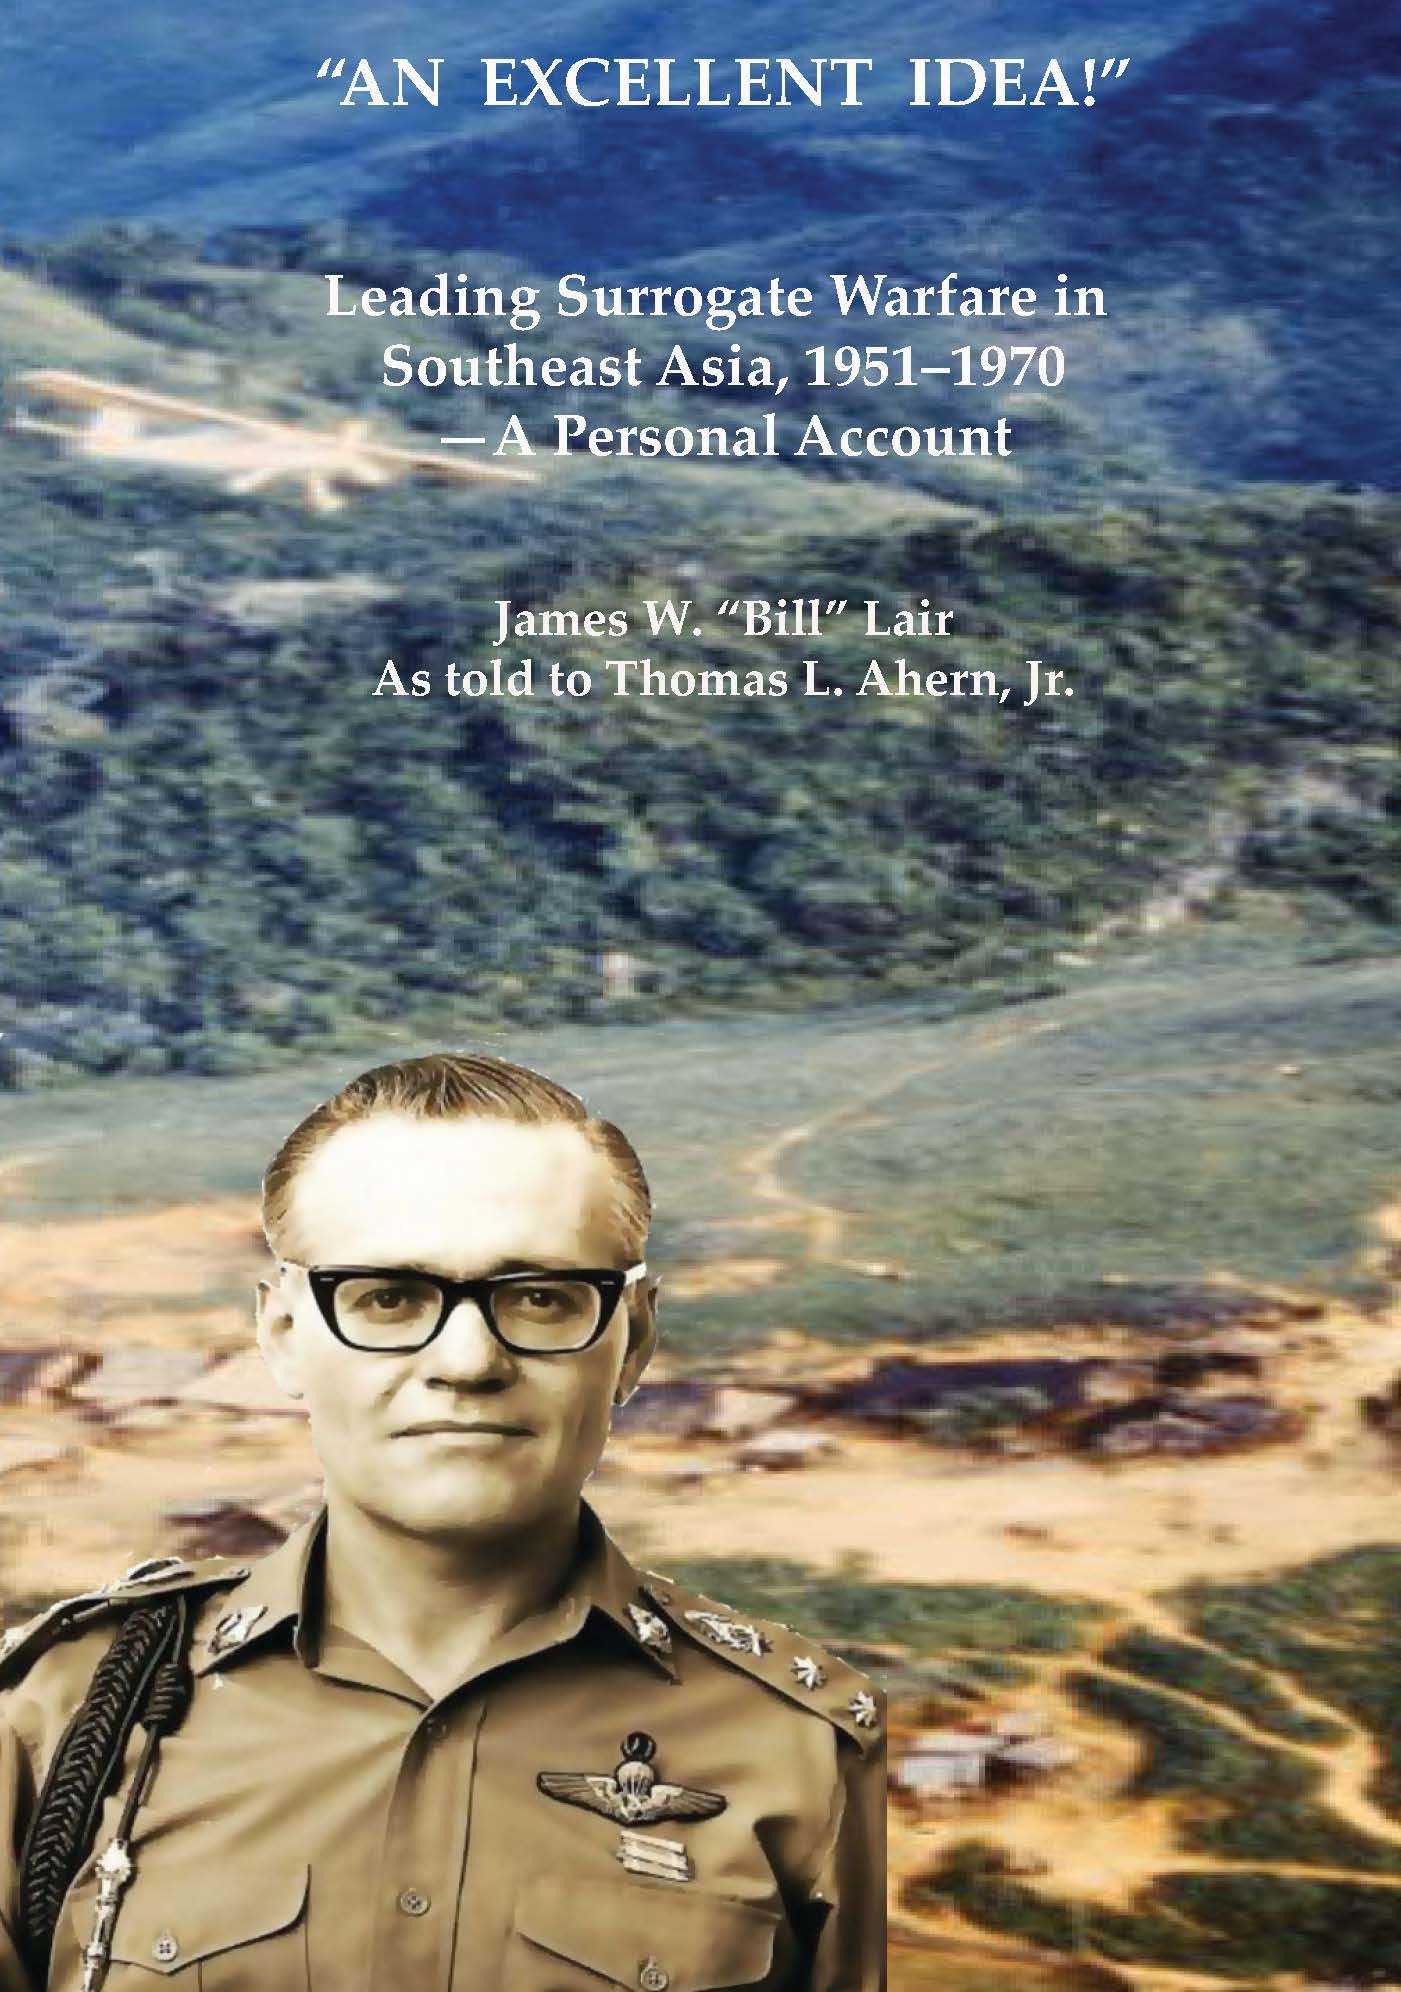 Book Cover shows James W. "Bill" Lair in Thai PARU uniform superimposed on a long view of Long Tieng Base in Laos.